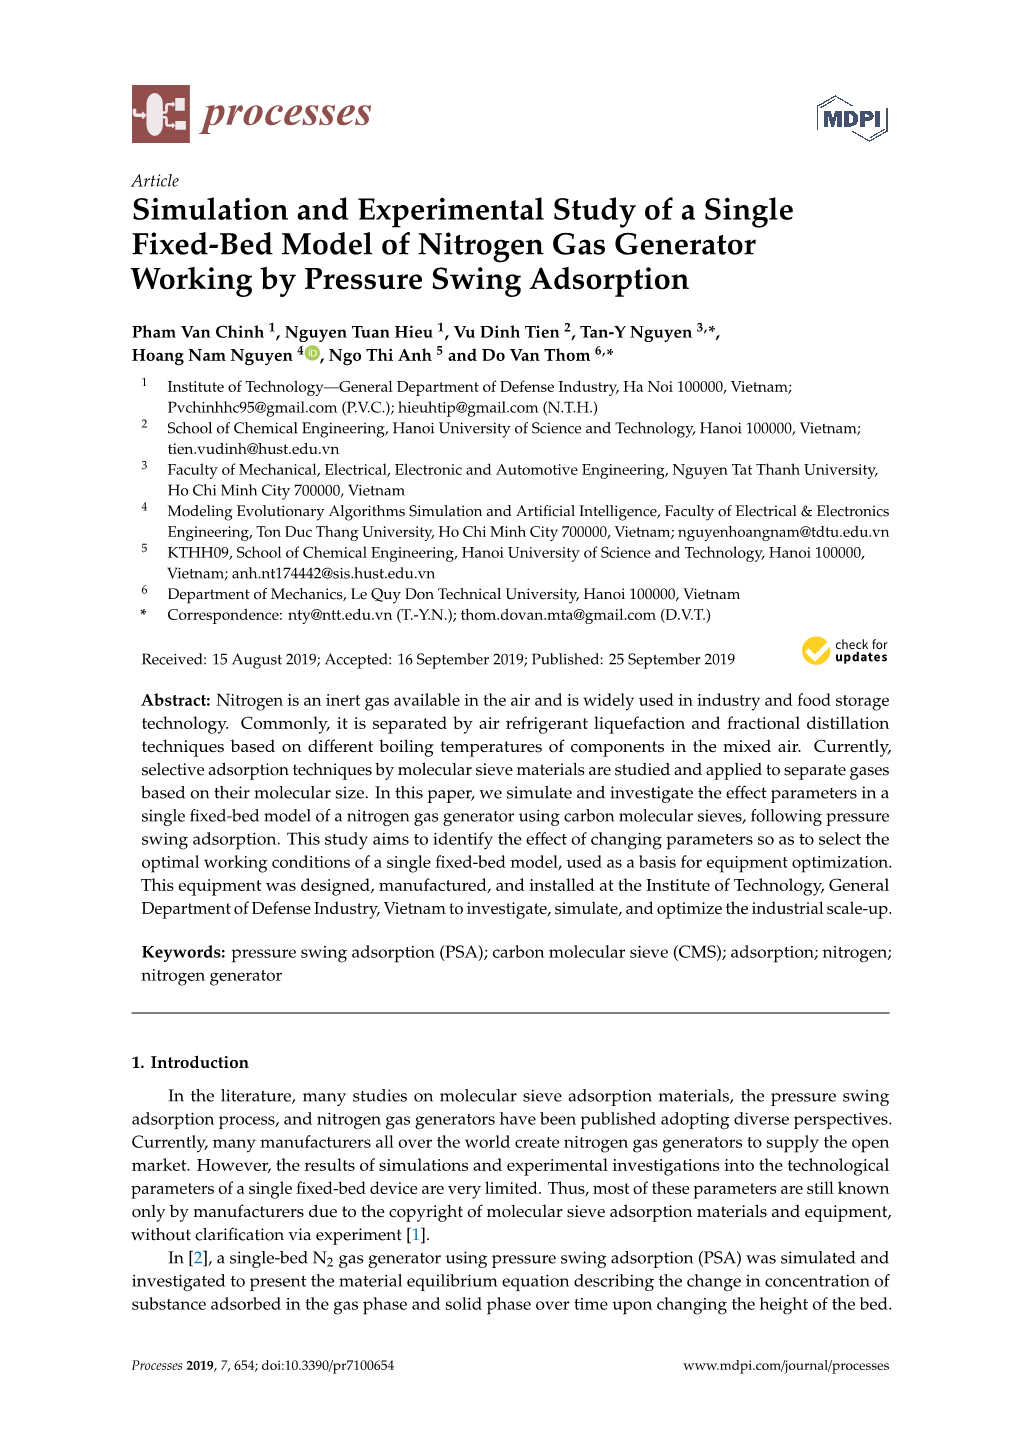 Simulation and Experimental Study of a Single Fixed-Bed Model of Nitrogen Gas Generator Working by Pressure Swing Adsorption